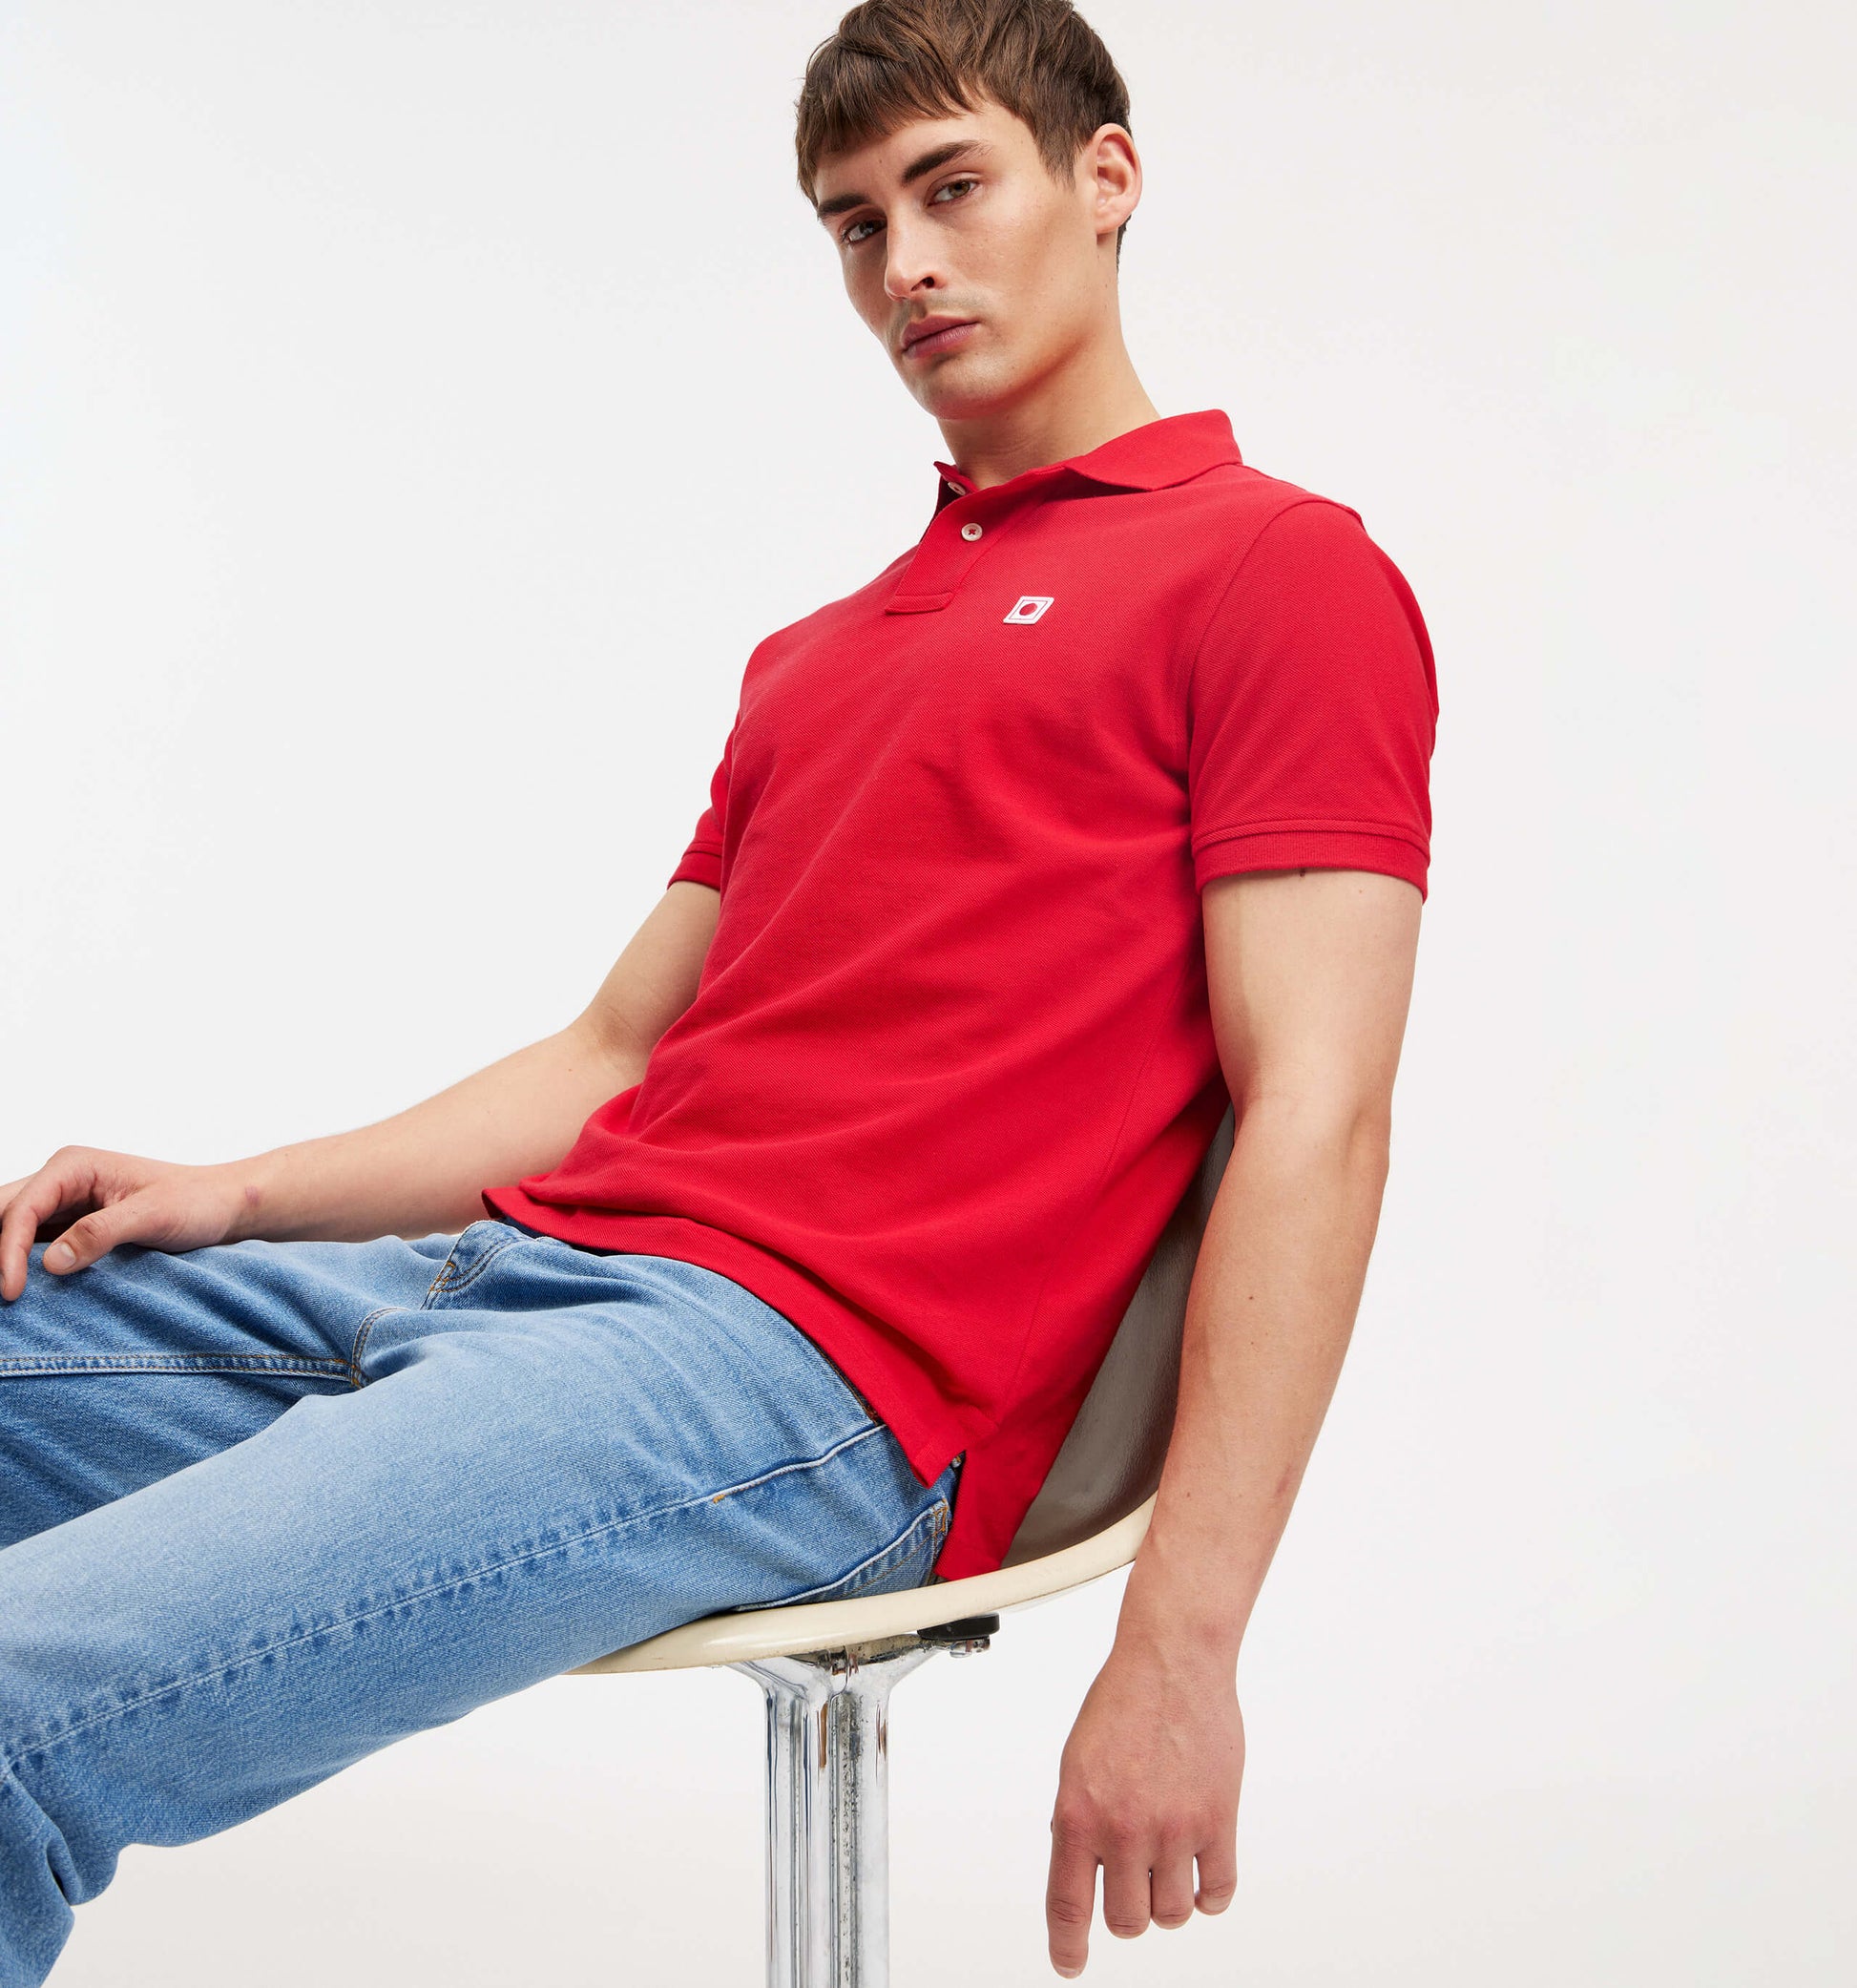 The Rene - Pique Polo In Red From King Essentials